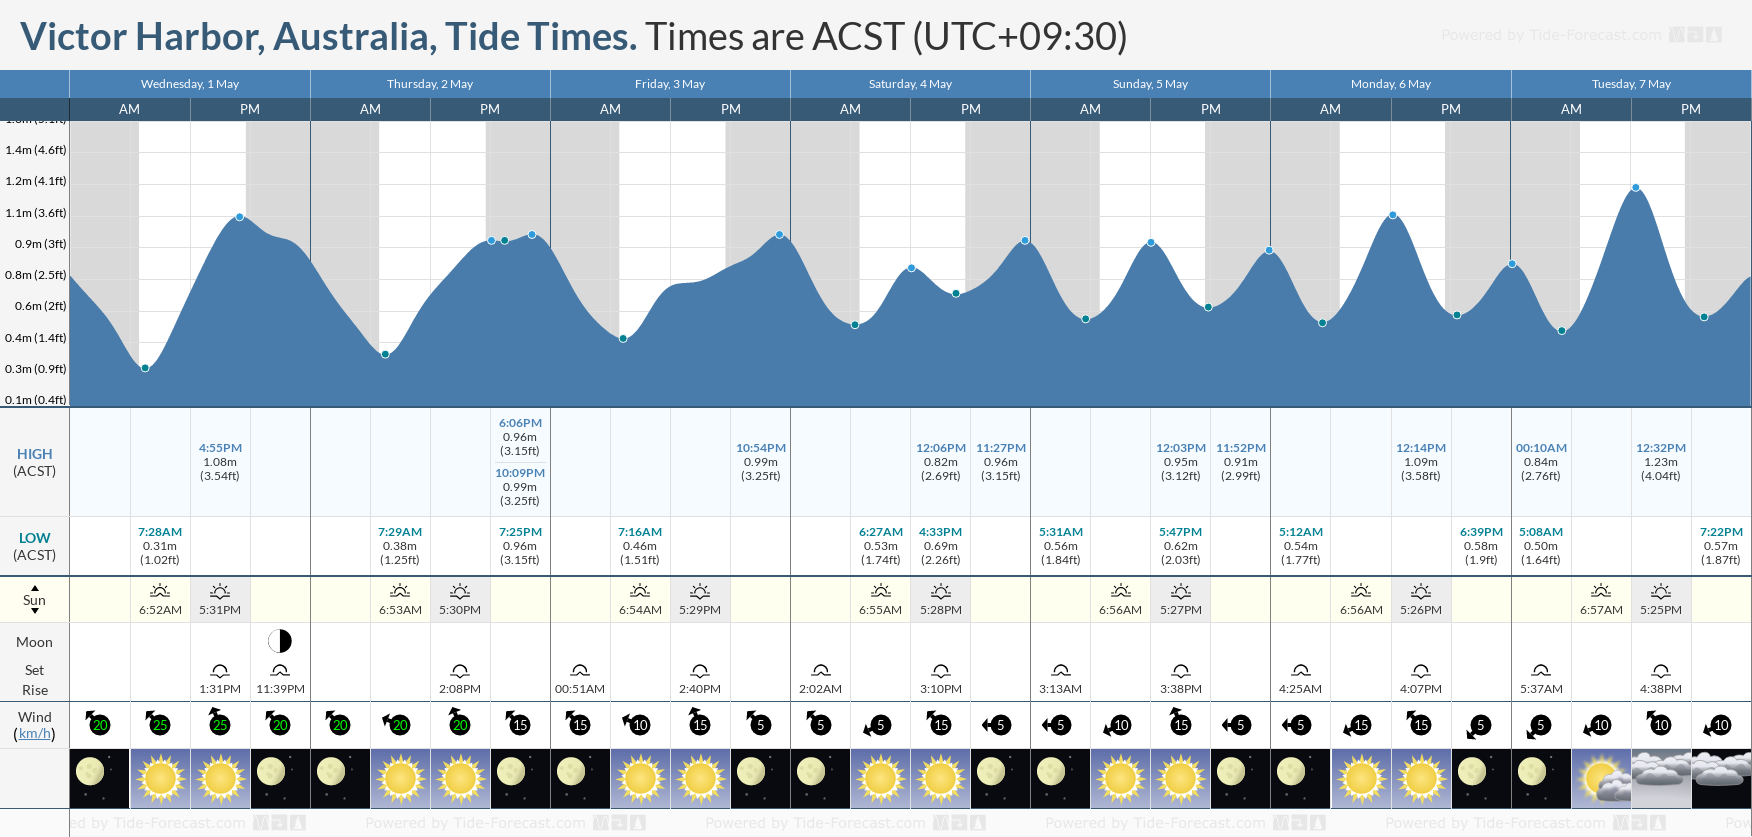 Victor Harbor, Australia Tide Chart including high and low tide tide times for the next 7 days